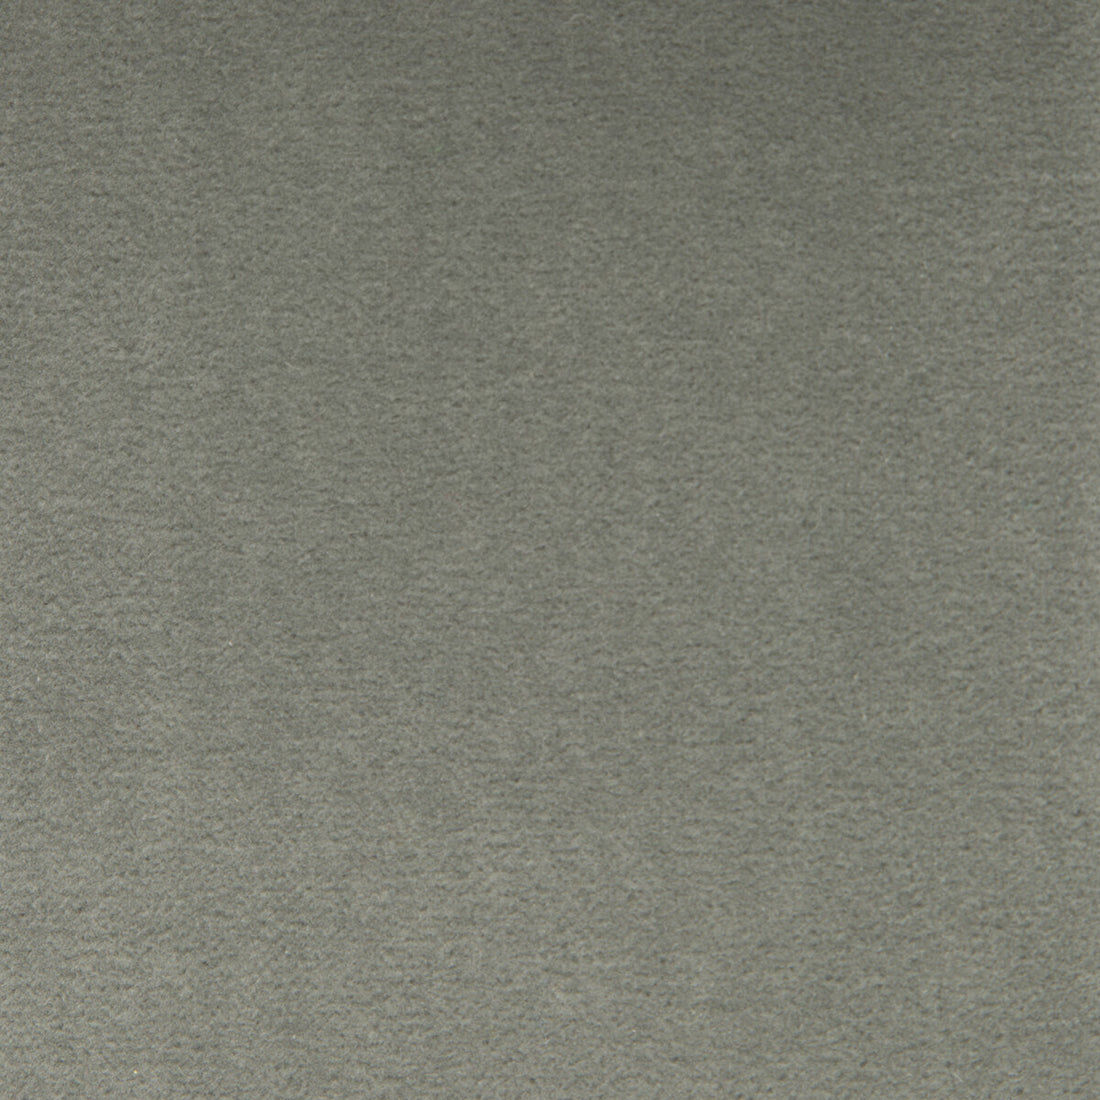 Venecia fabric in gris color - pattern GDT5230.024.0 - by Gaston y Daniela in the Basics collection